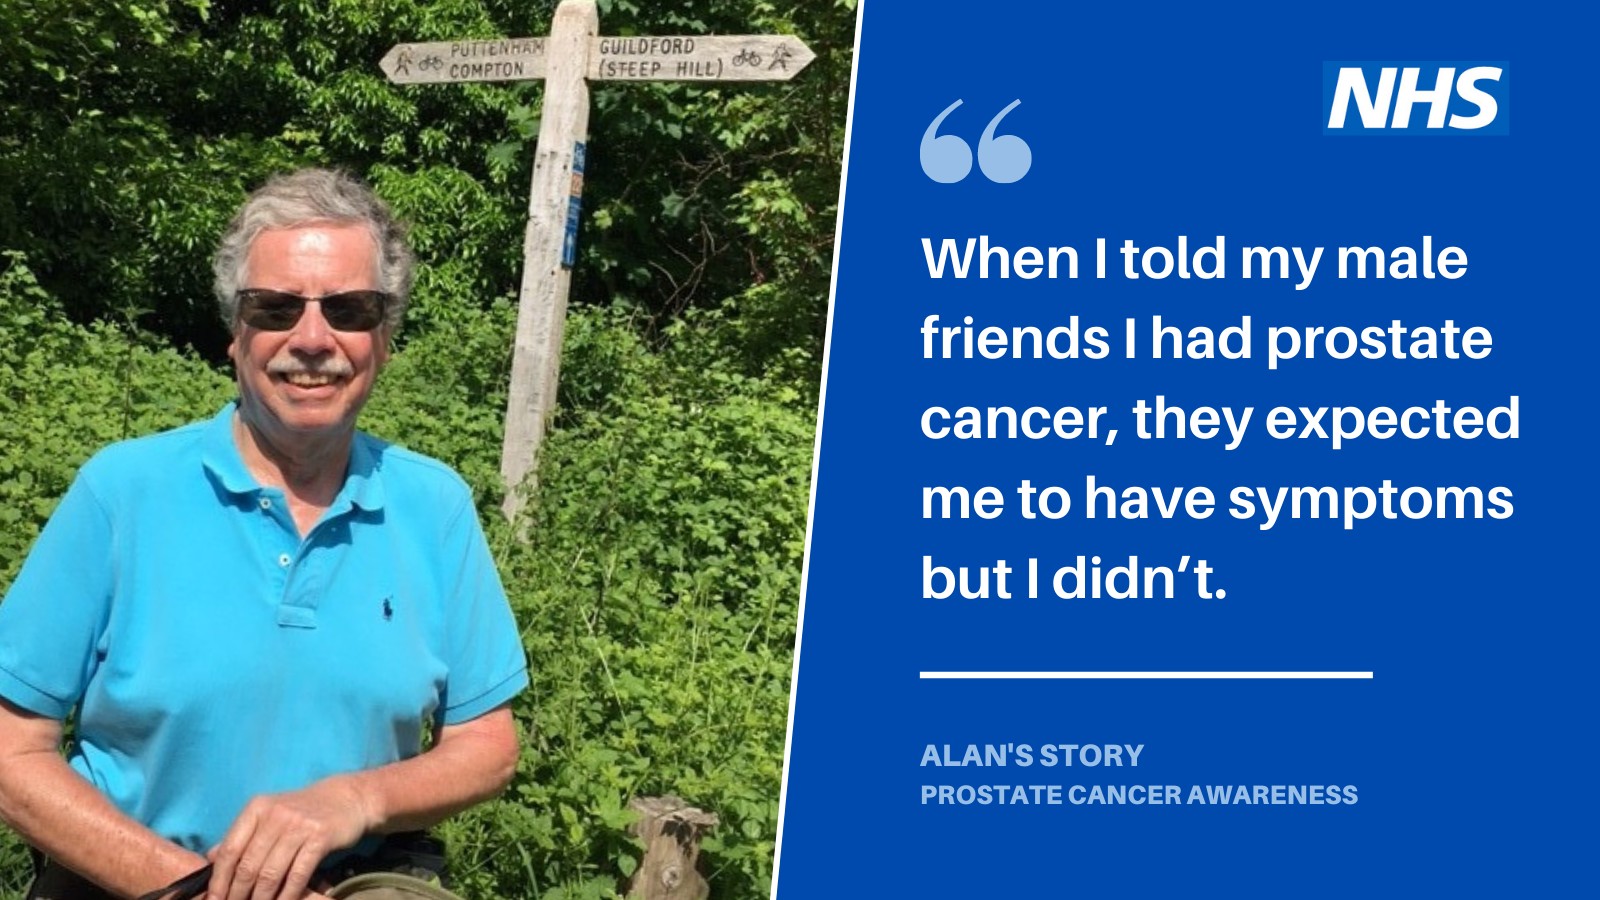 photo shows a man called Alan who says:" When I told my friends I had prostate cancer they thought I would have symptoms but I didn't."